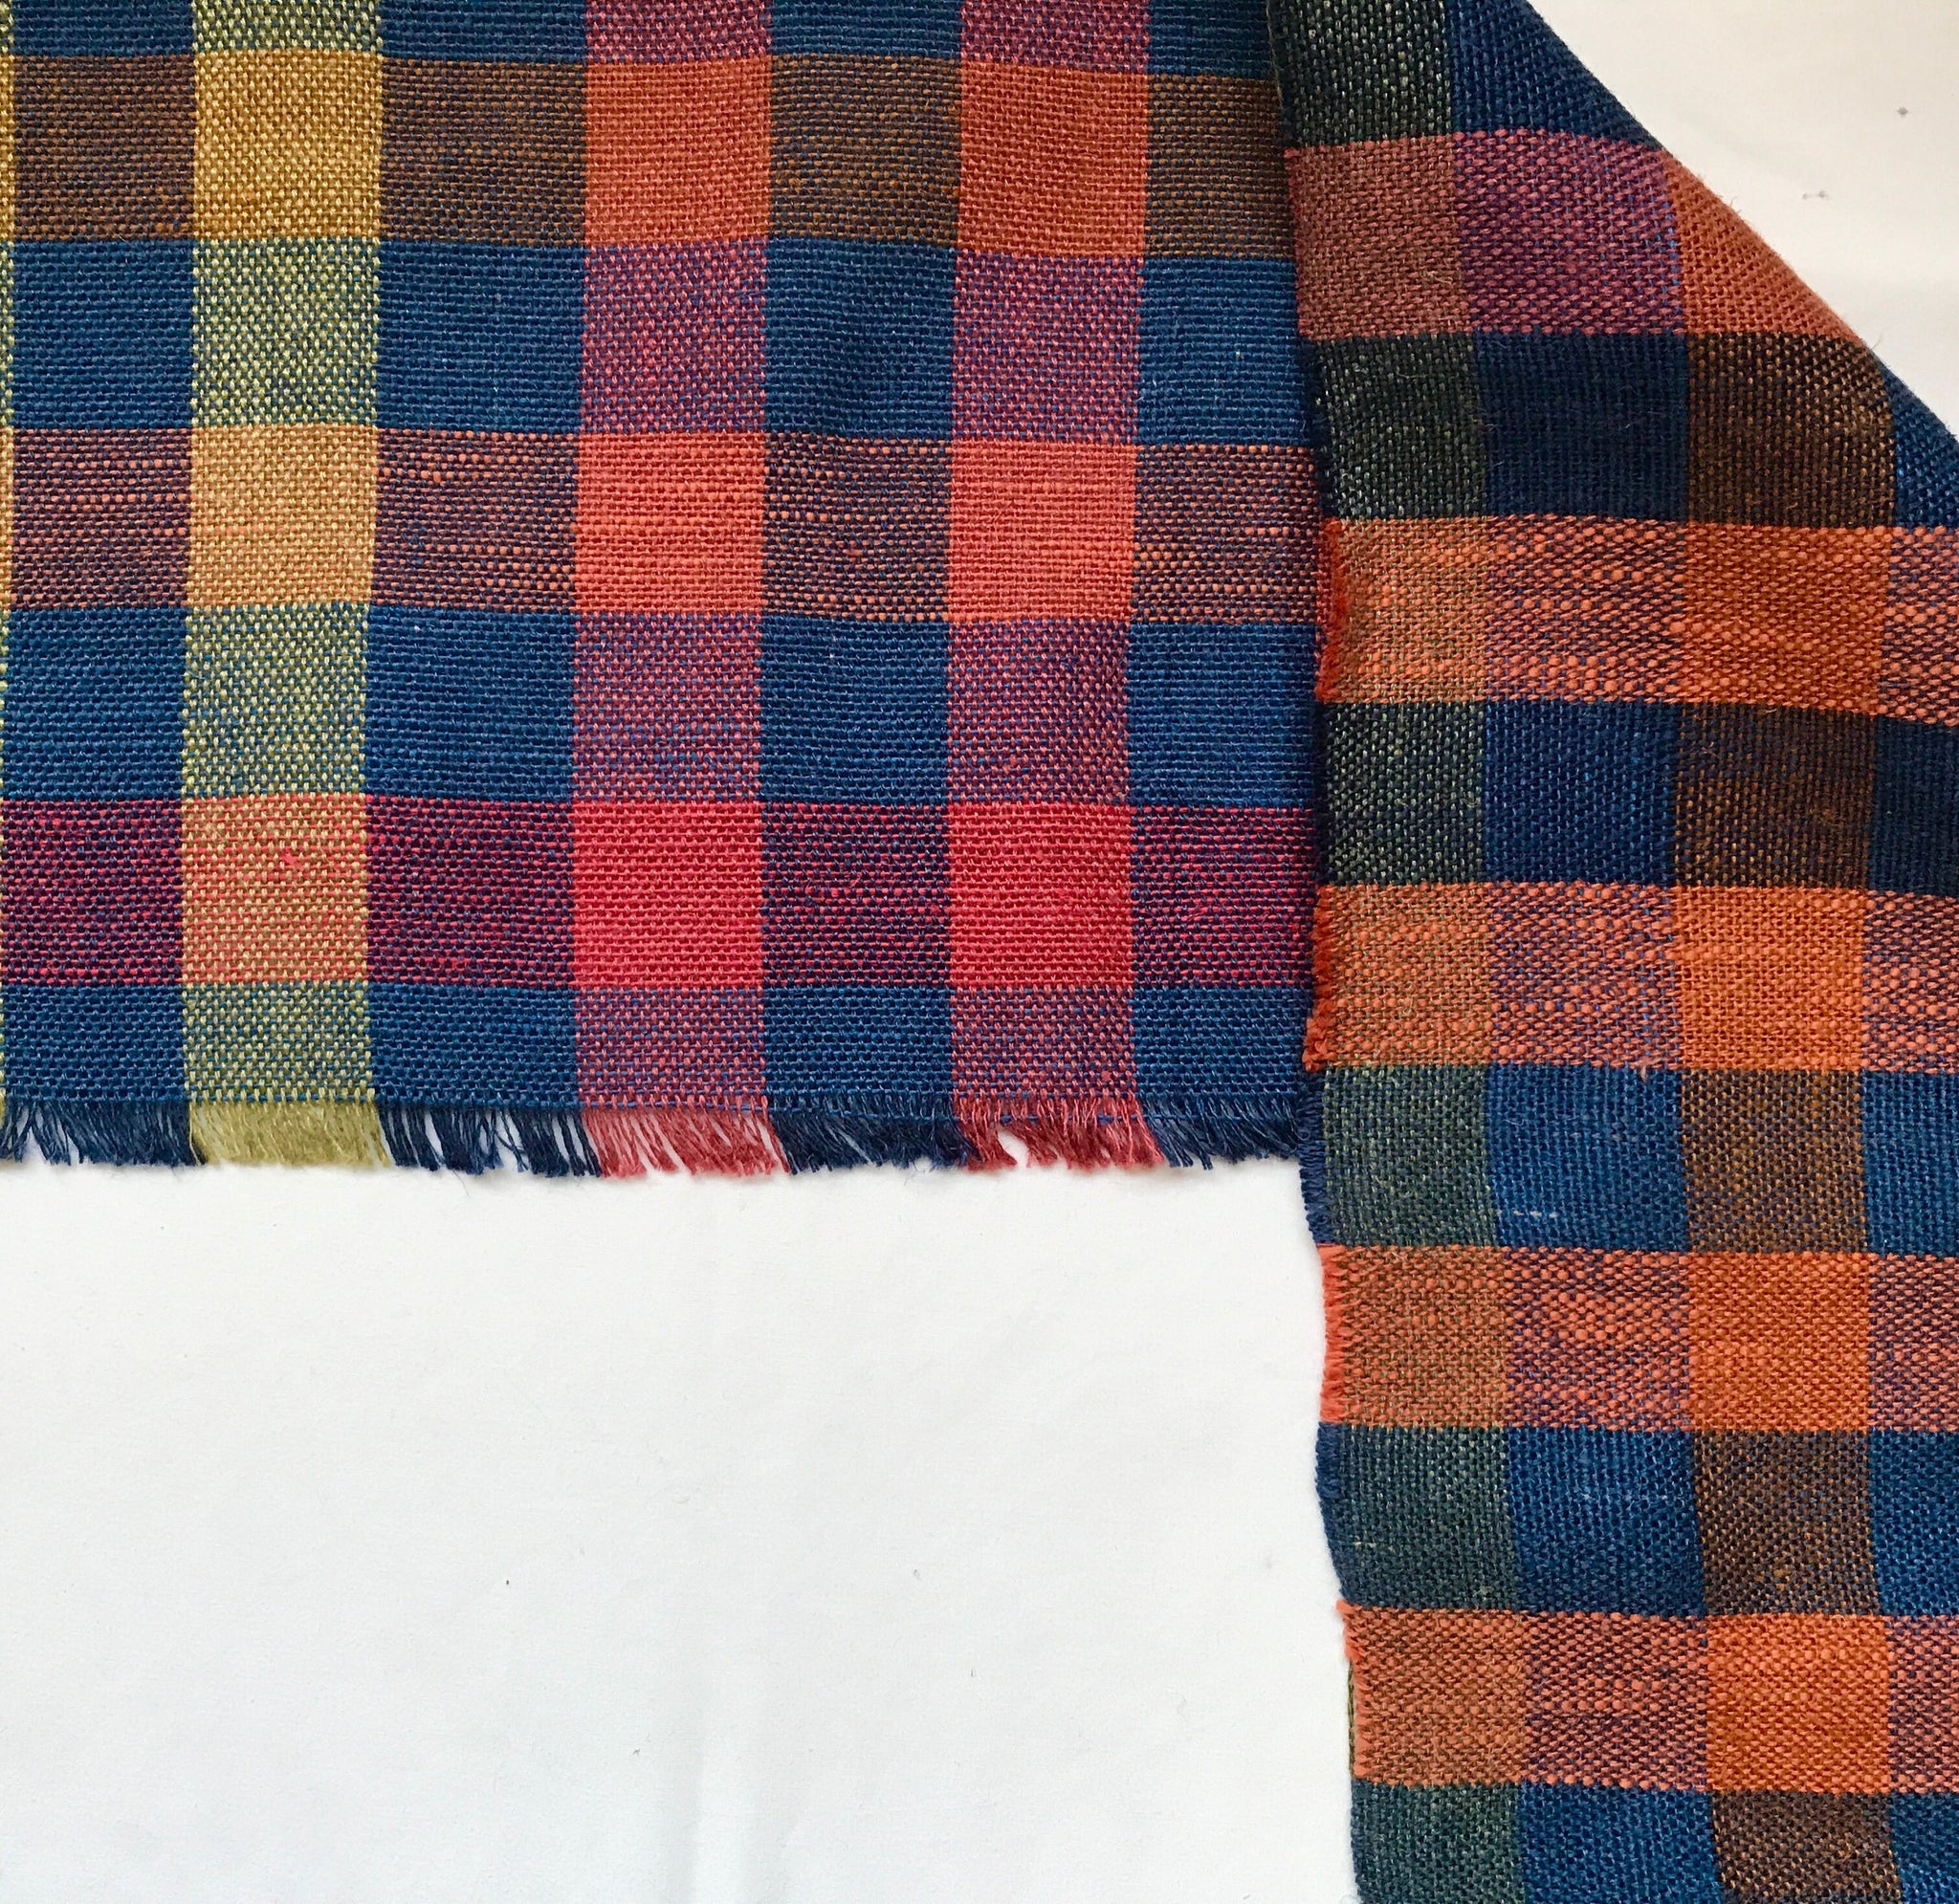 Handwoven Chequered Picnic